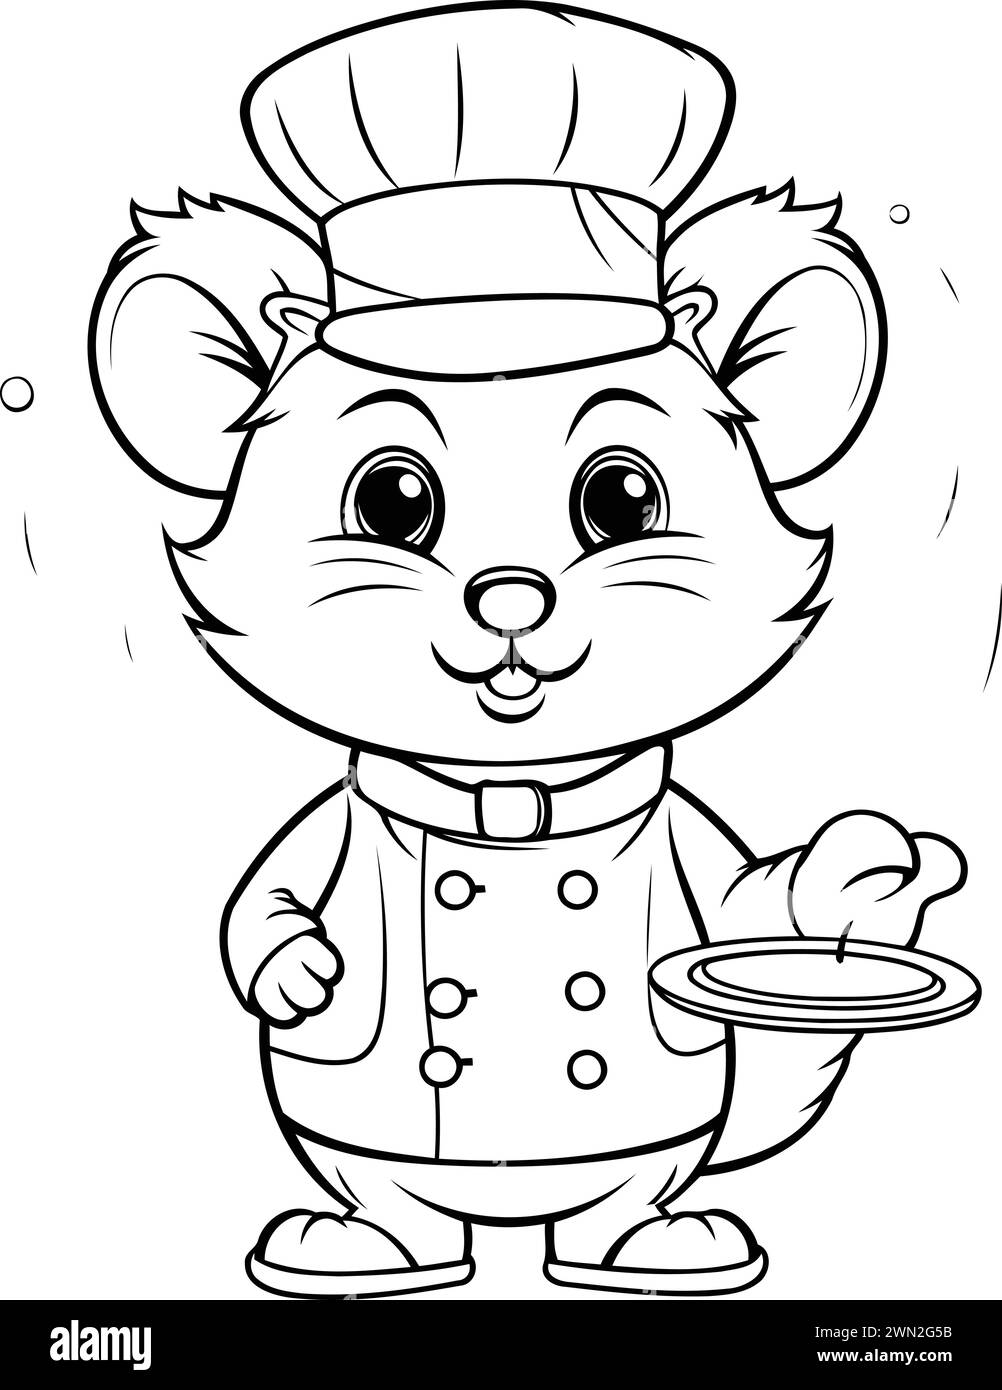 Black and White Cartoon Illustration of Mouse Chef Character for Coloring Book Stock Vector